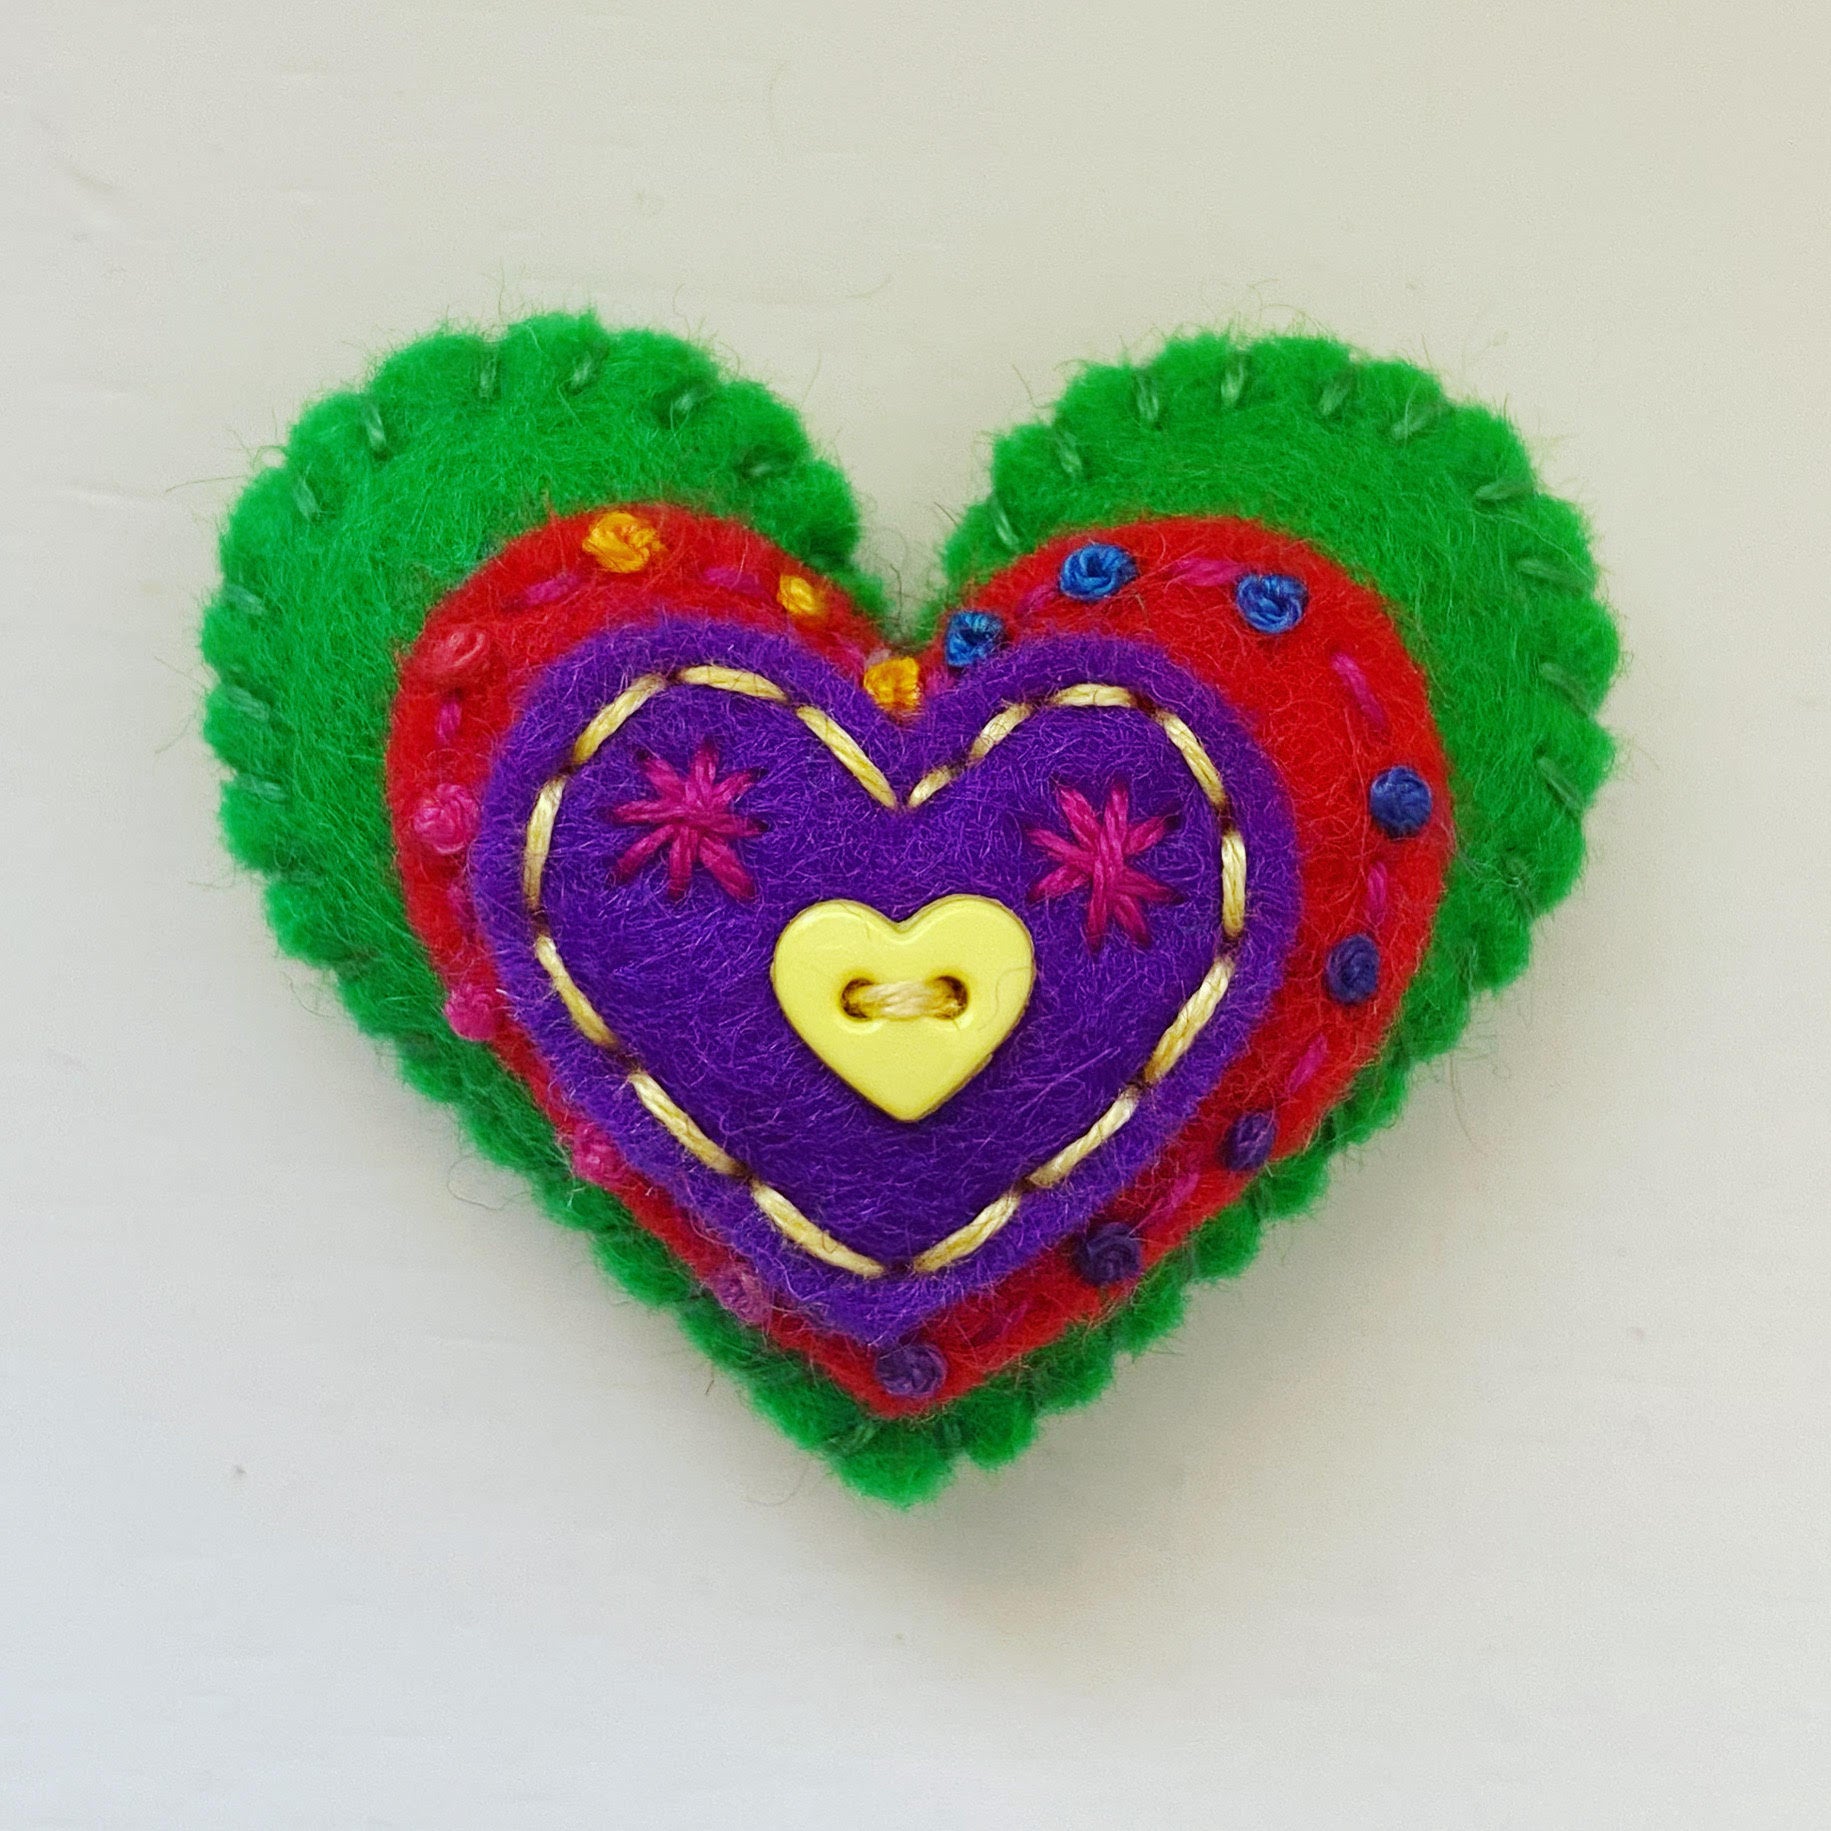 Small Embellished Heart (4.5cm)